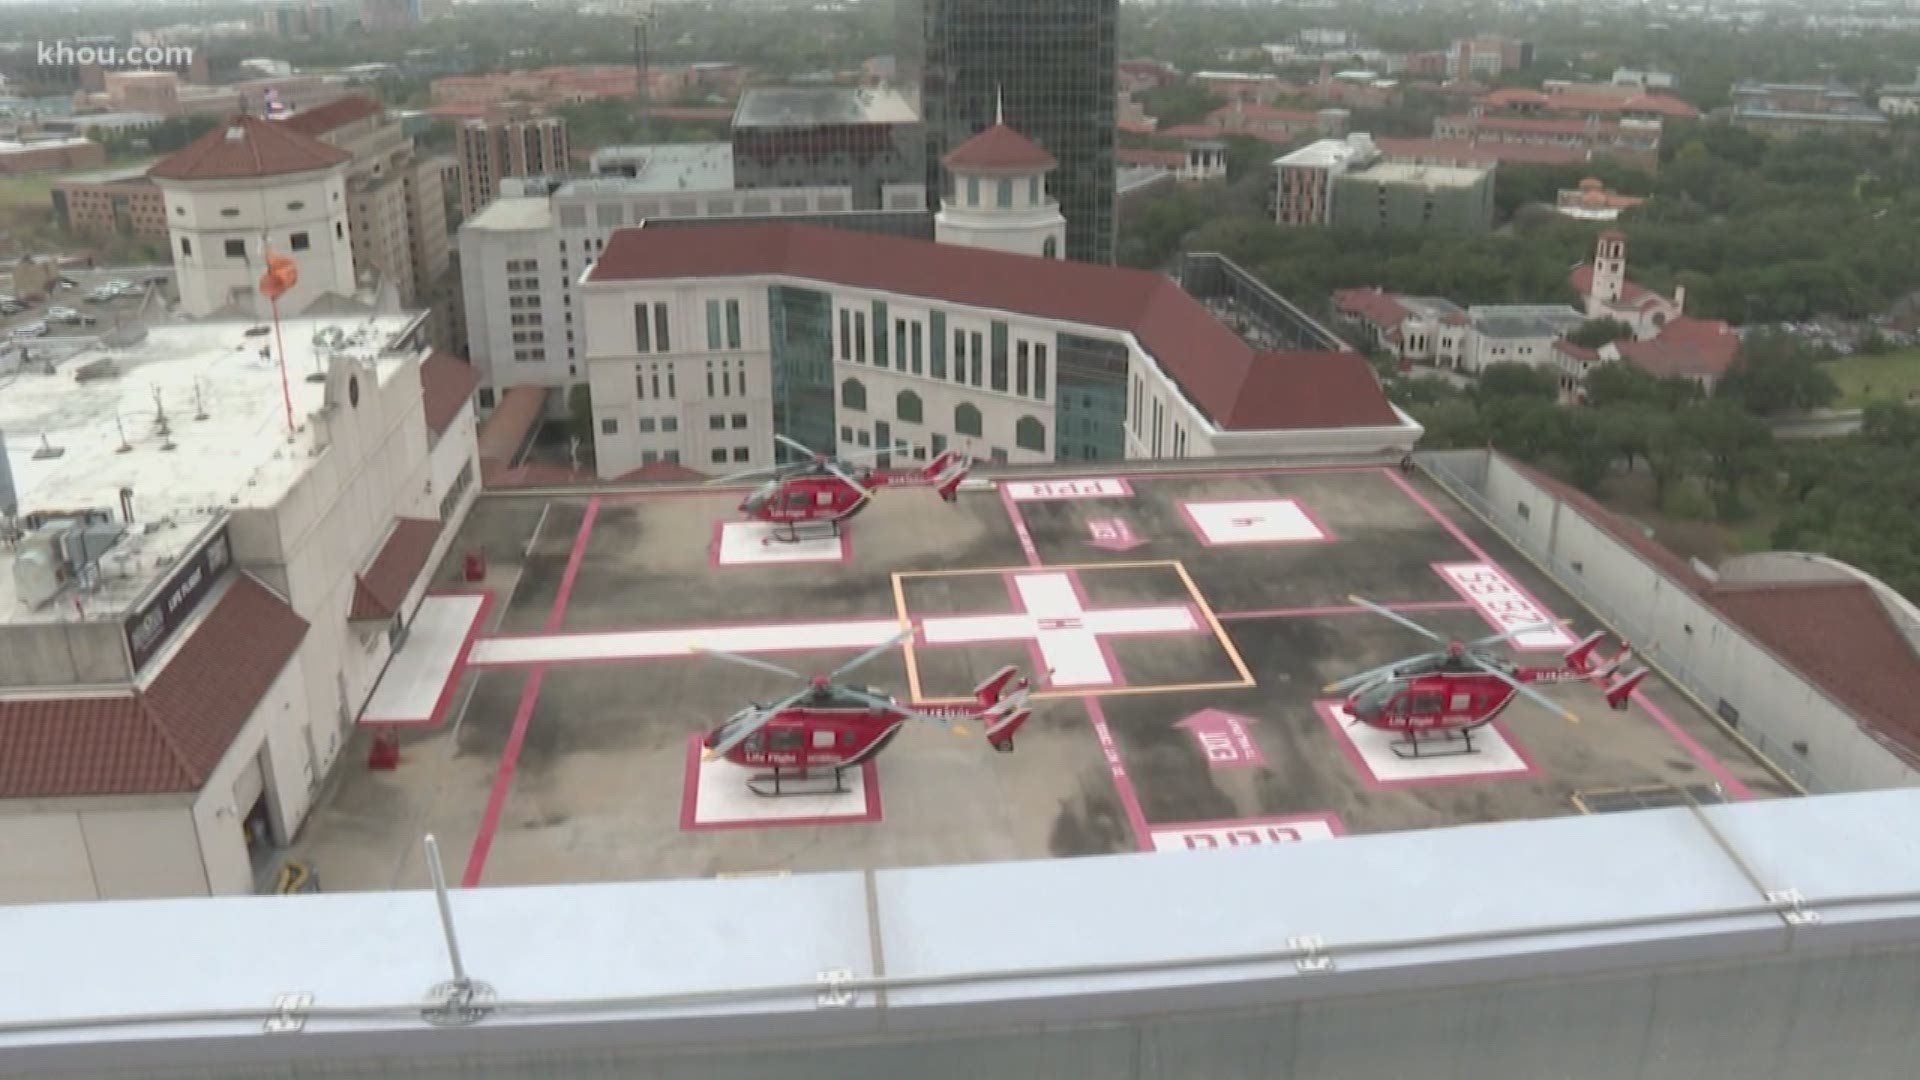 The state-of-the-art facility will help the busiest trauma center in Texas save even for more lives.